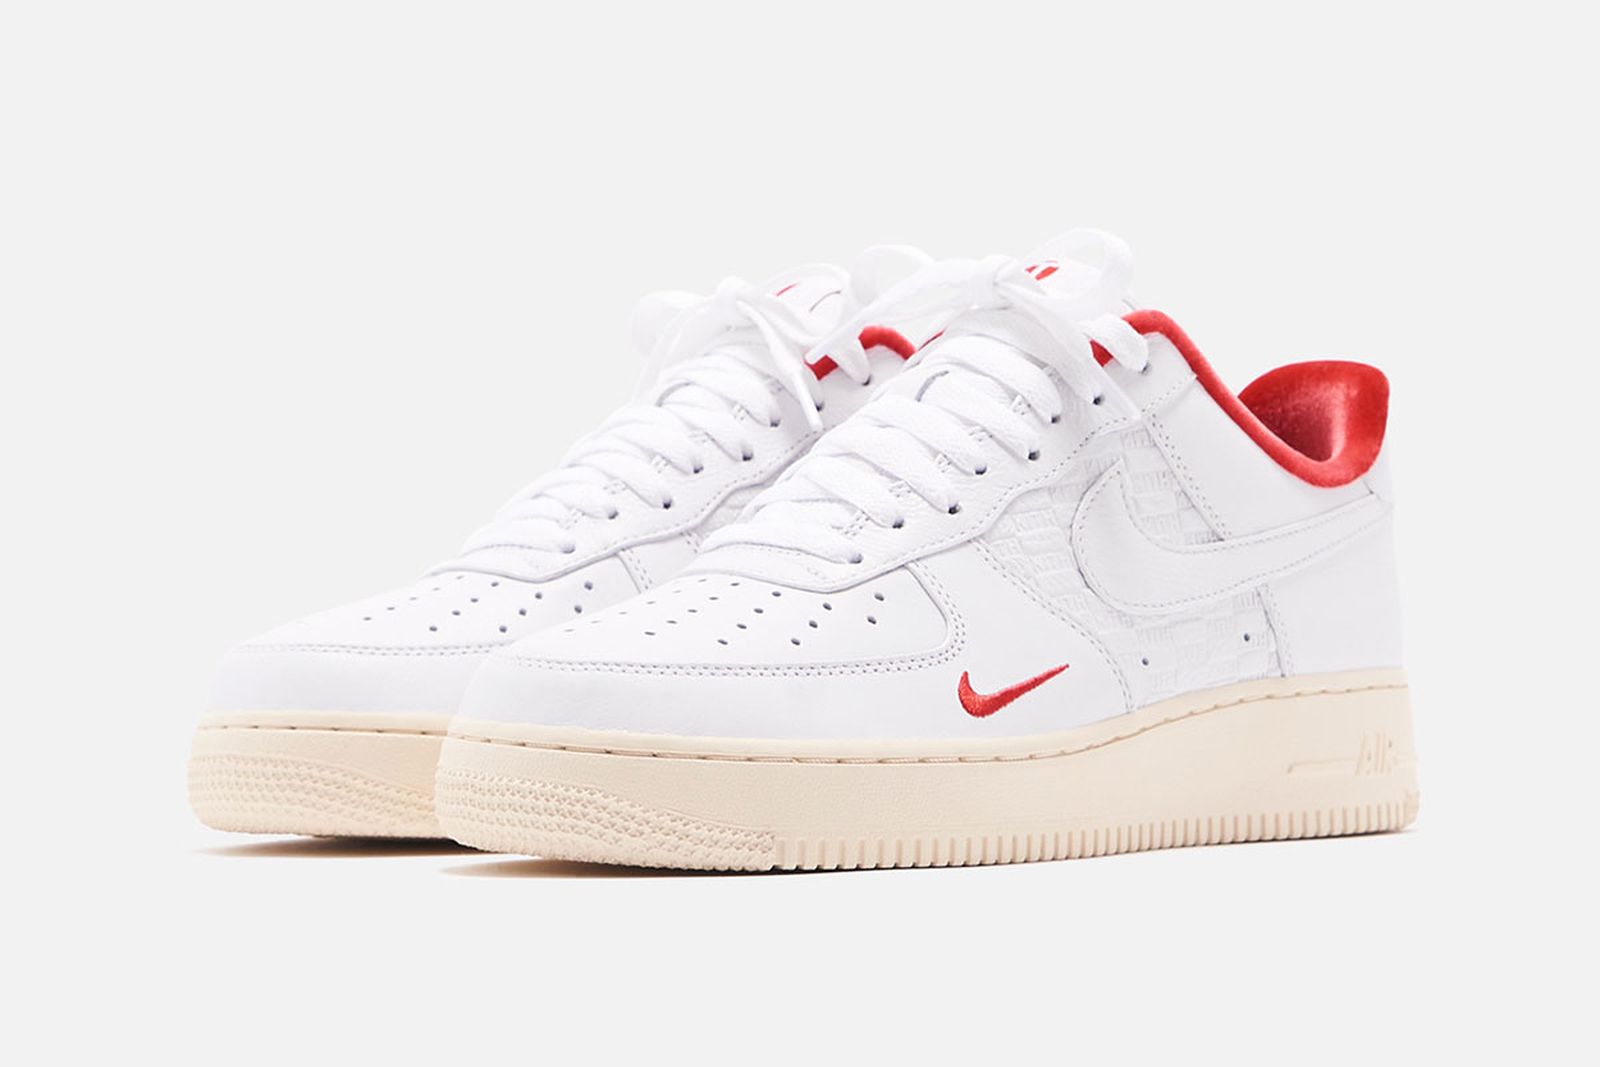 Kith x Nike Air Force 1 “Tokyo”: Official Release Information